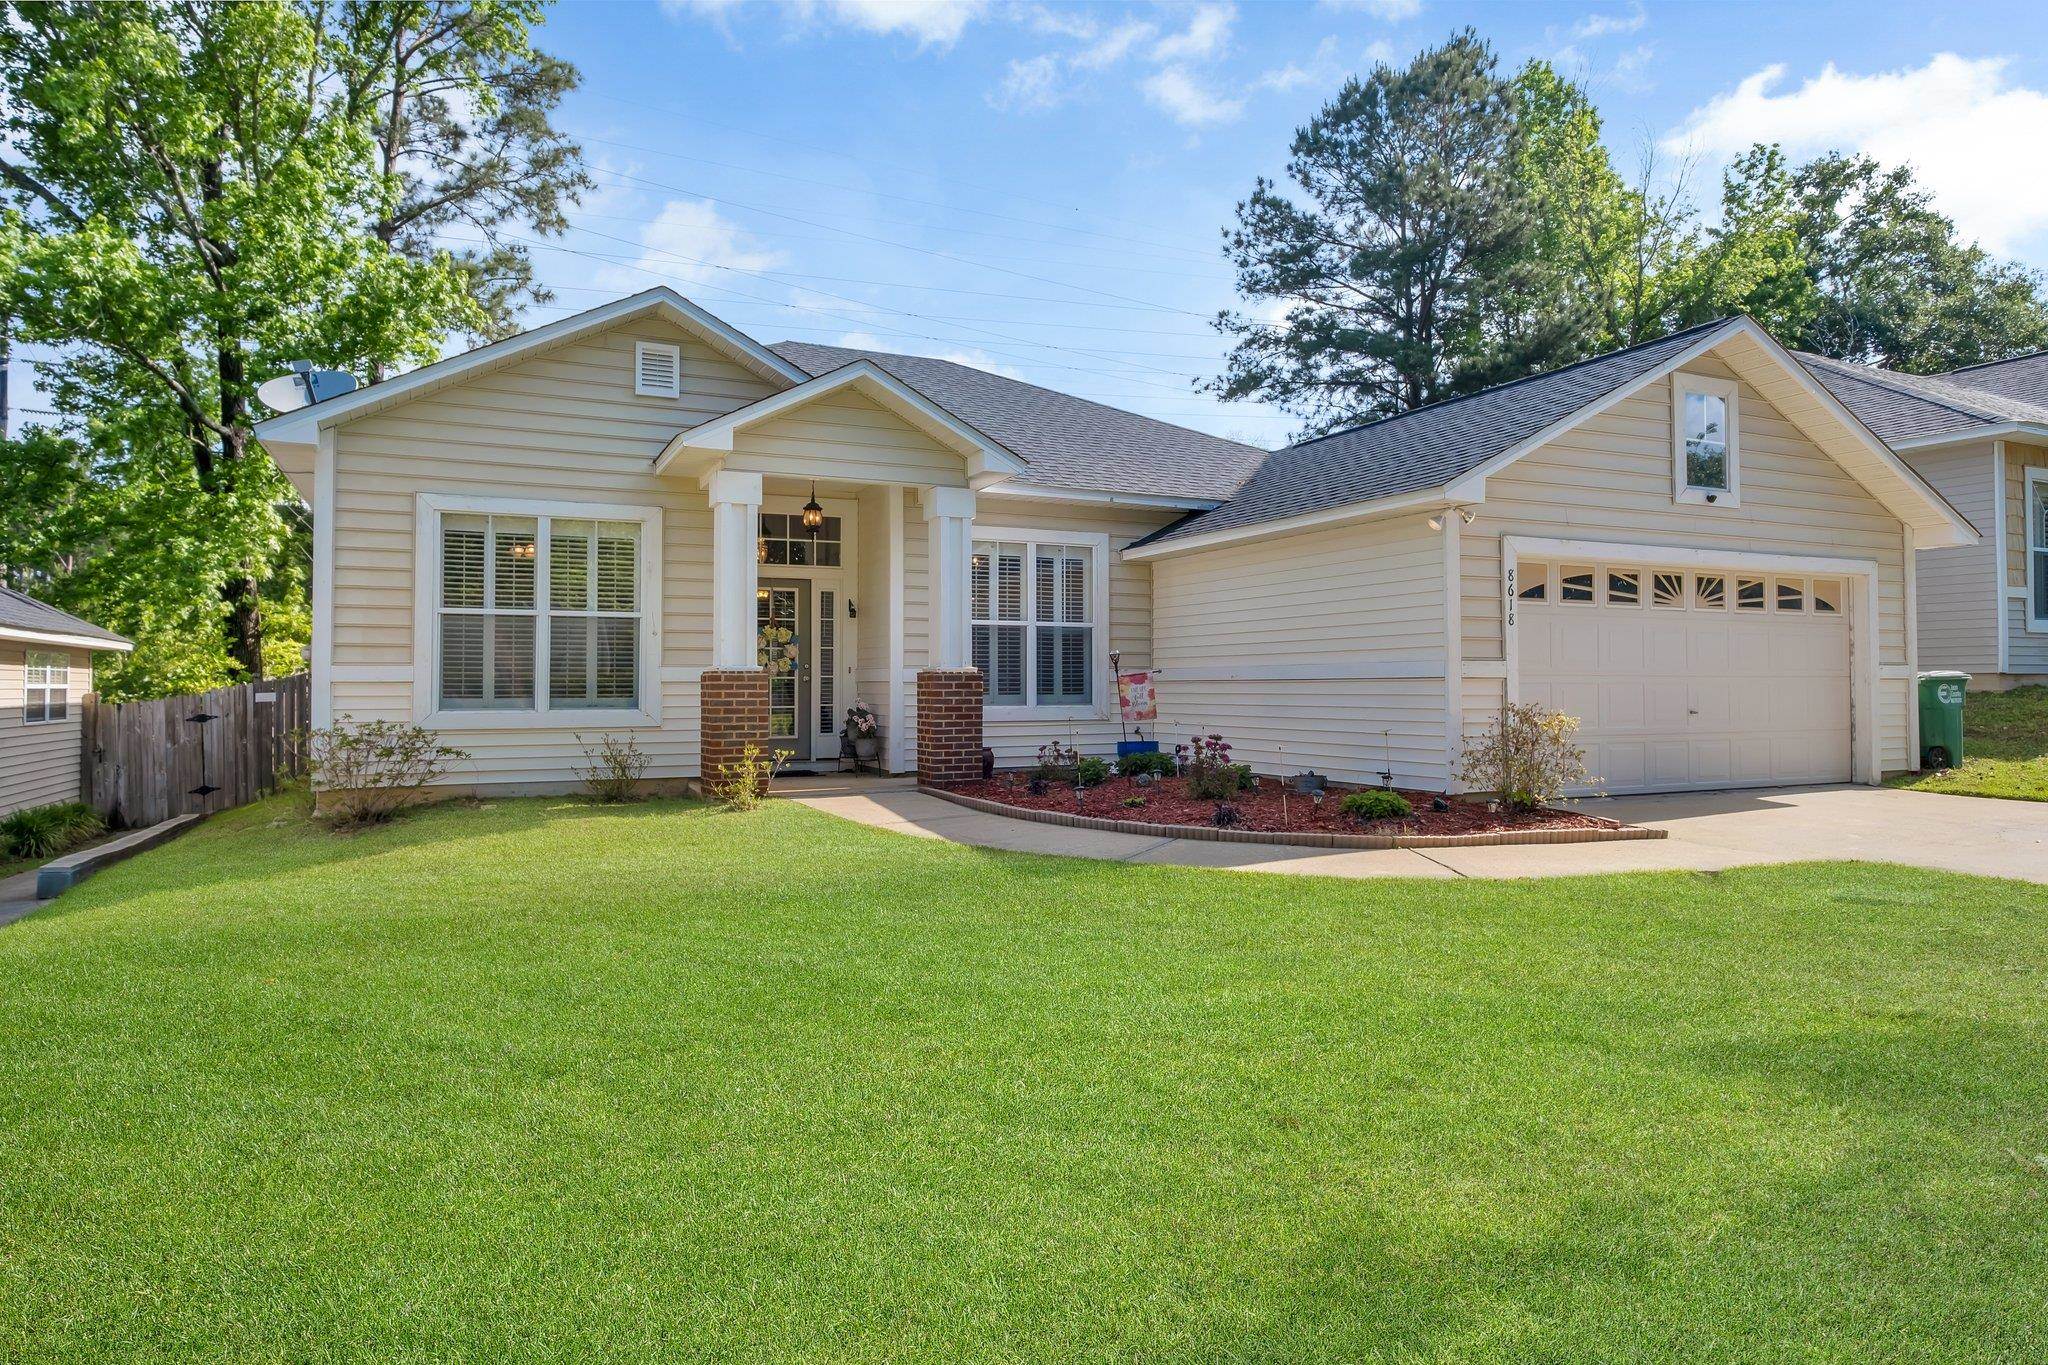 Property: 8618 Milford Court,Tallahassee, FL